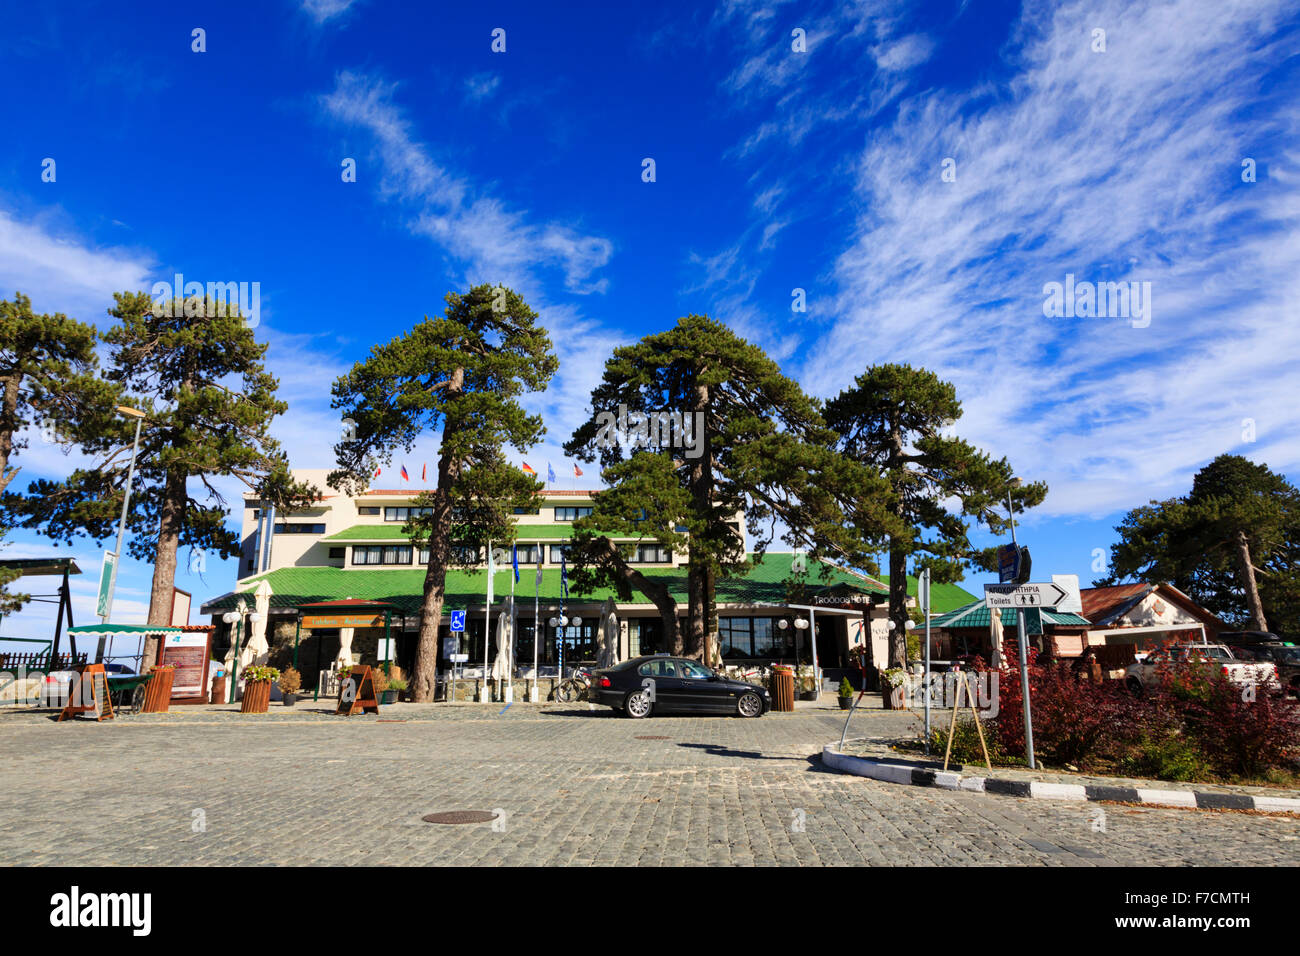 The Troodos Hotel, Mount Troodos, Cyprus. Stock Photo